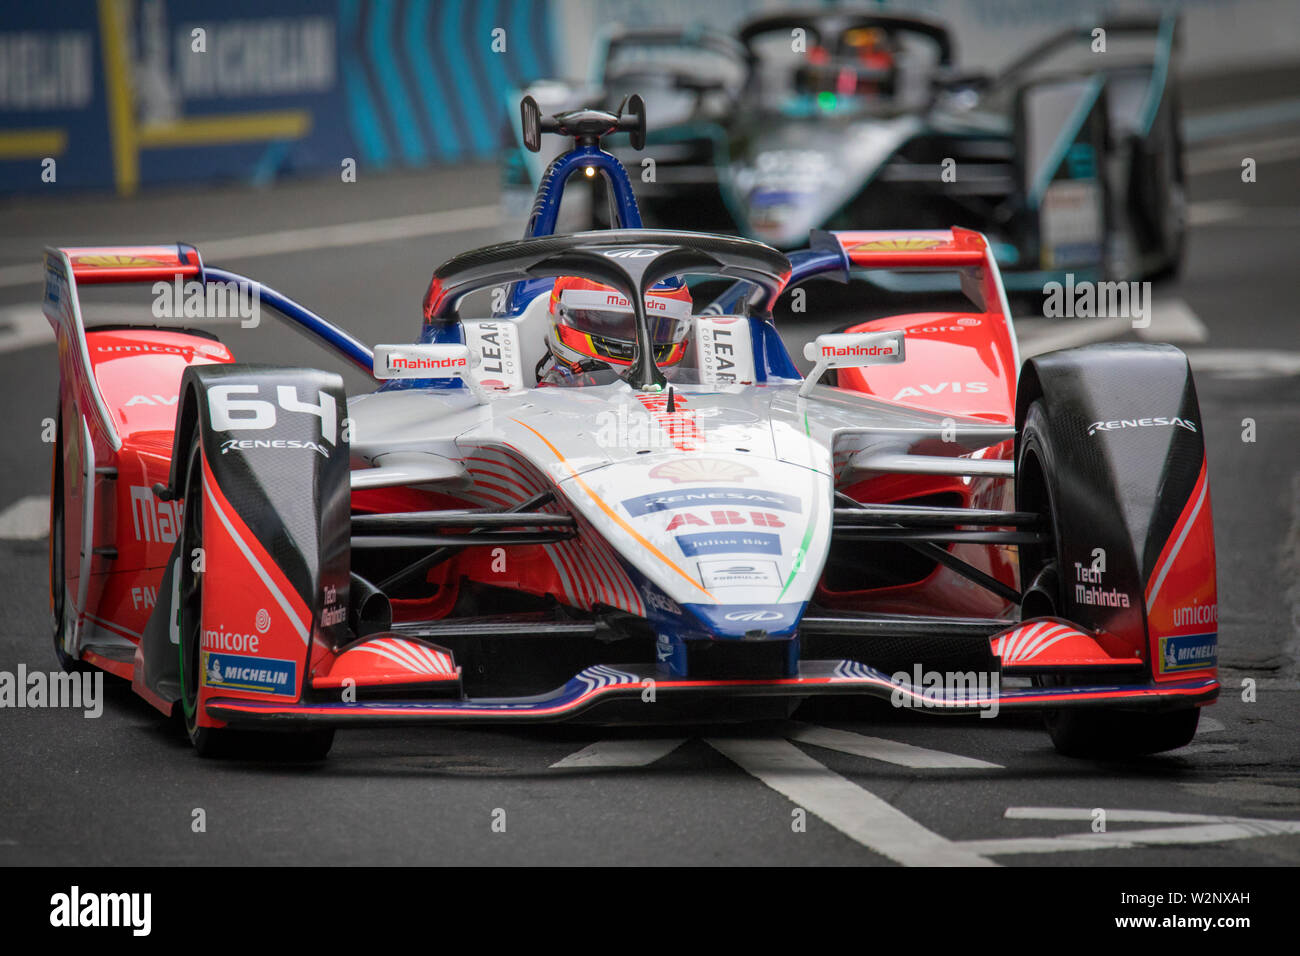 Jérôme d'Ambrosio during Free Practice session ahead of the Julius Bär Formula E race in the swiss capital Bern. Stock Photo